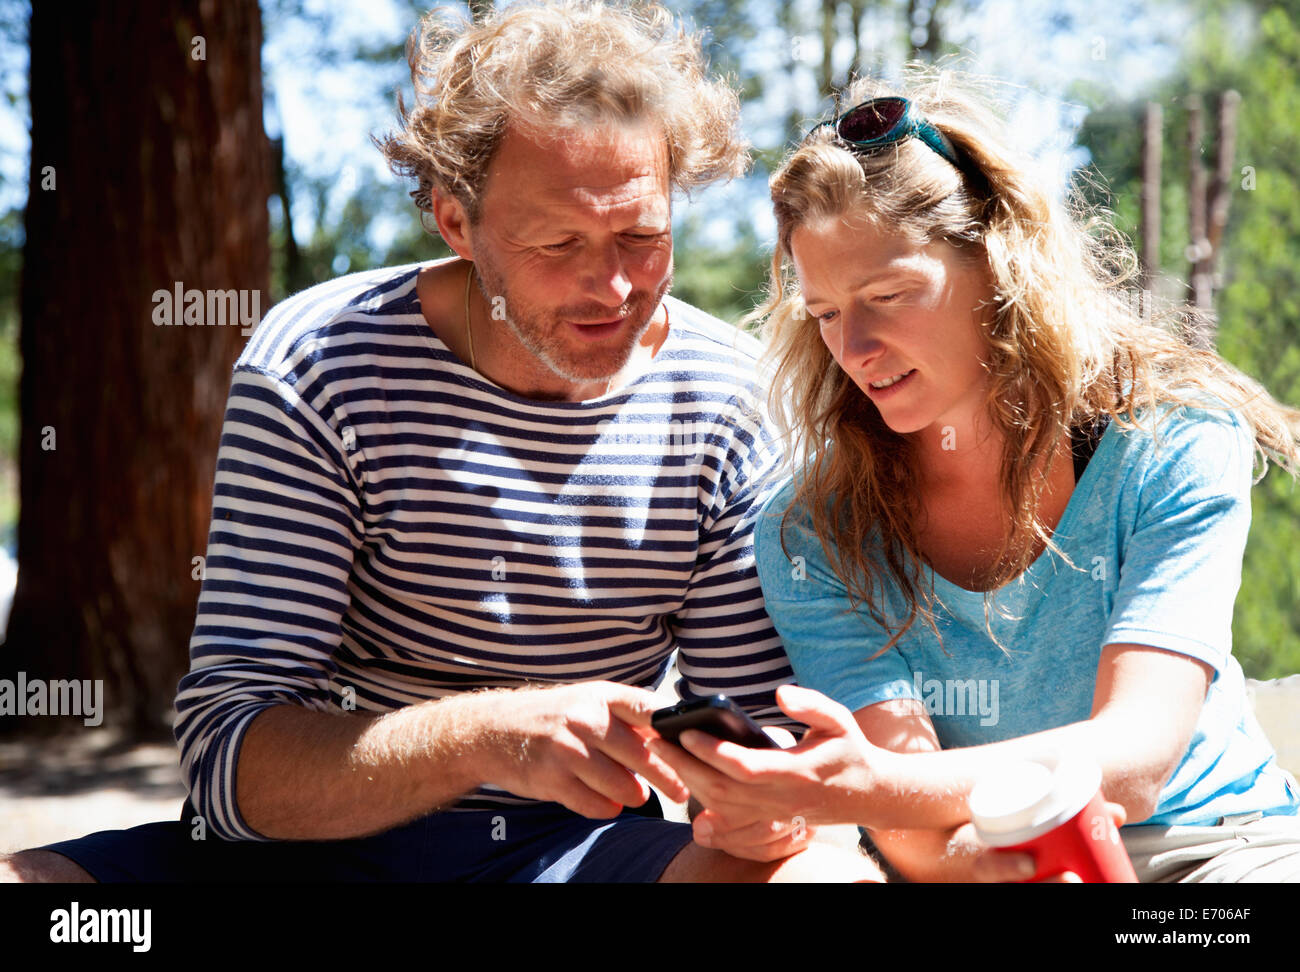 Couple looking down at smartphone in forest Banque D'Images